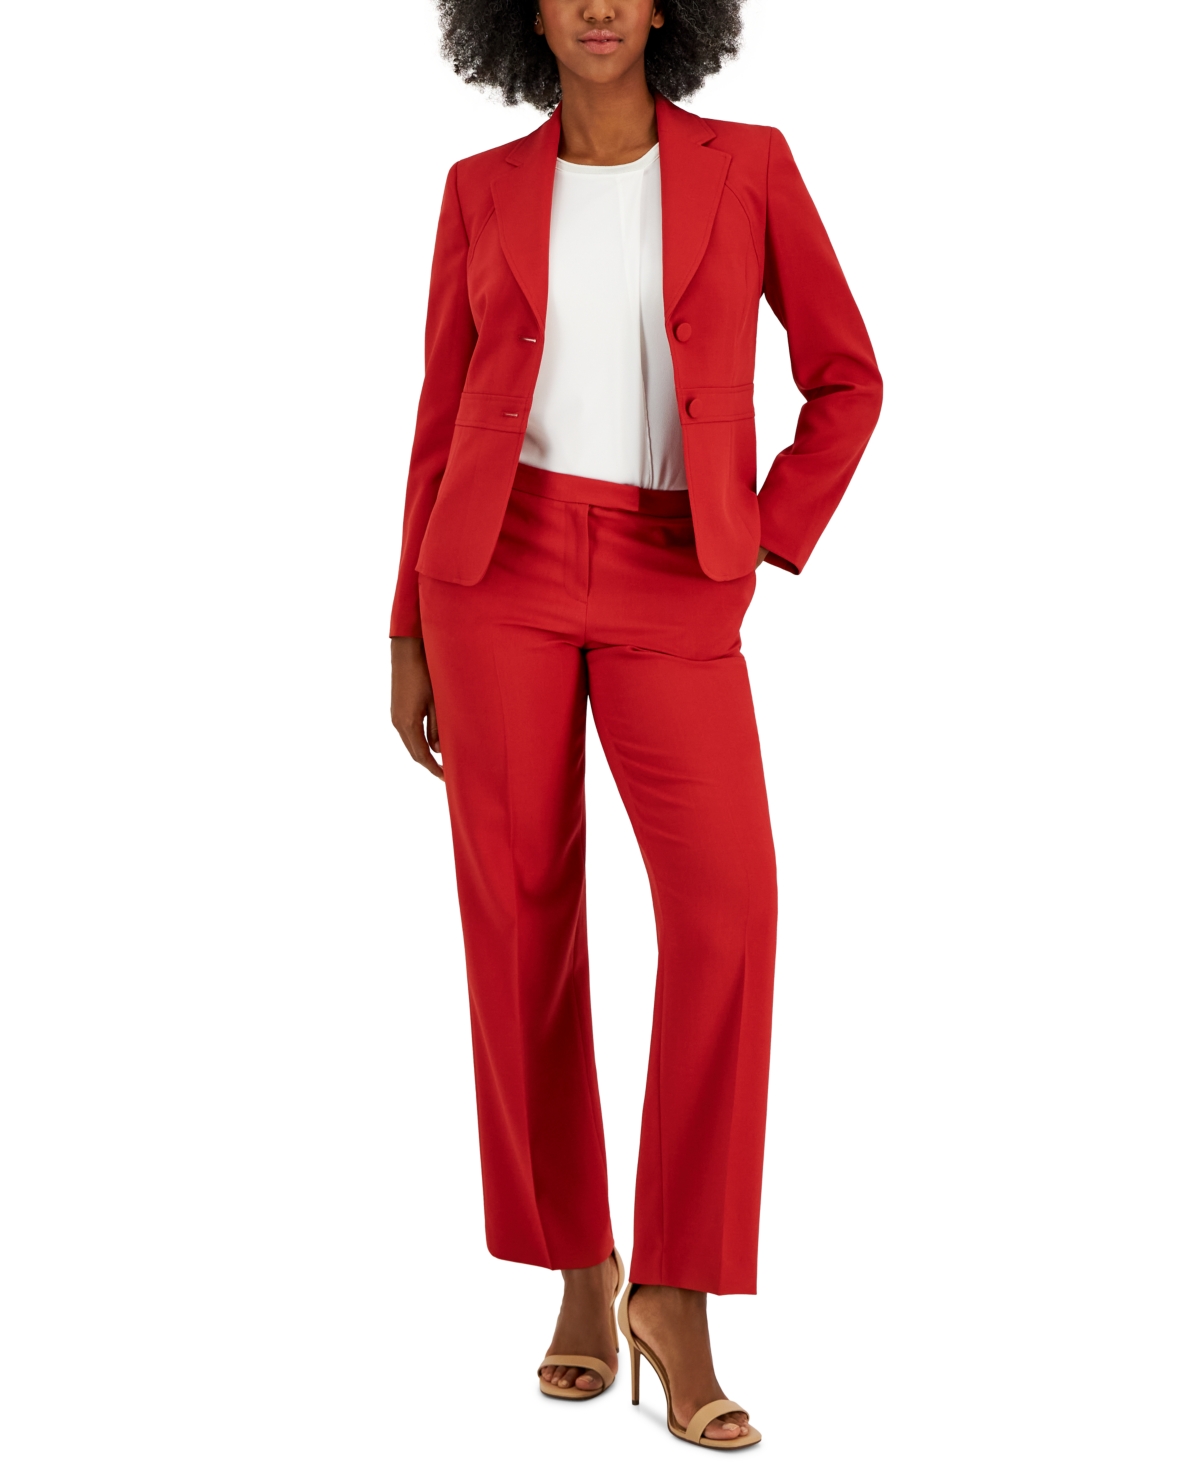 Le Suit Crepe Two-button Blazer & Pants, Regular And Petite Sizes In Brick